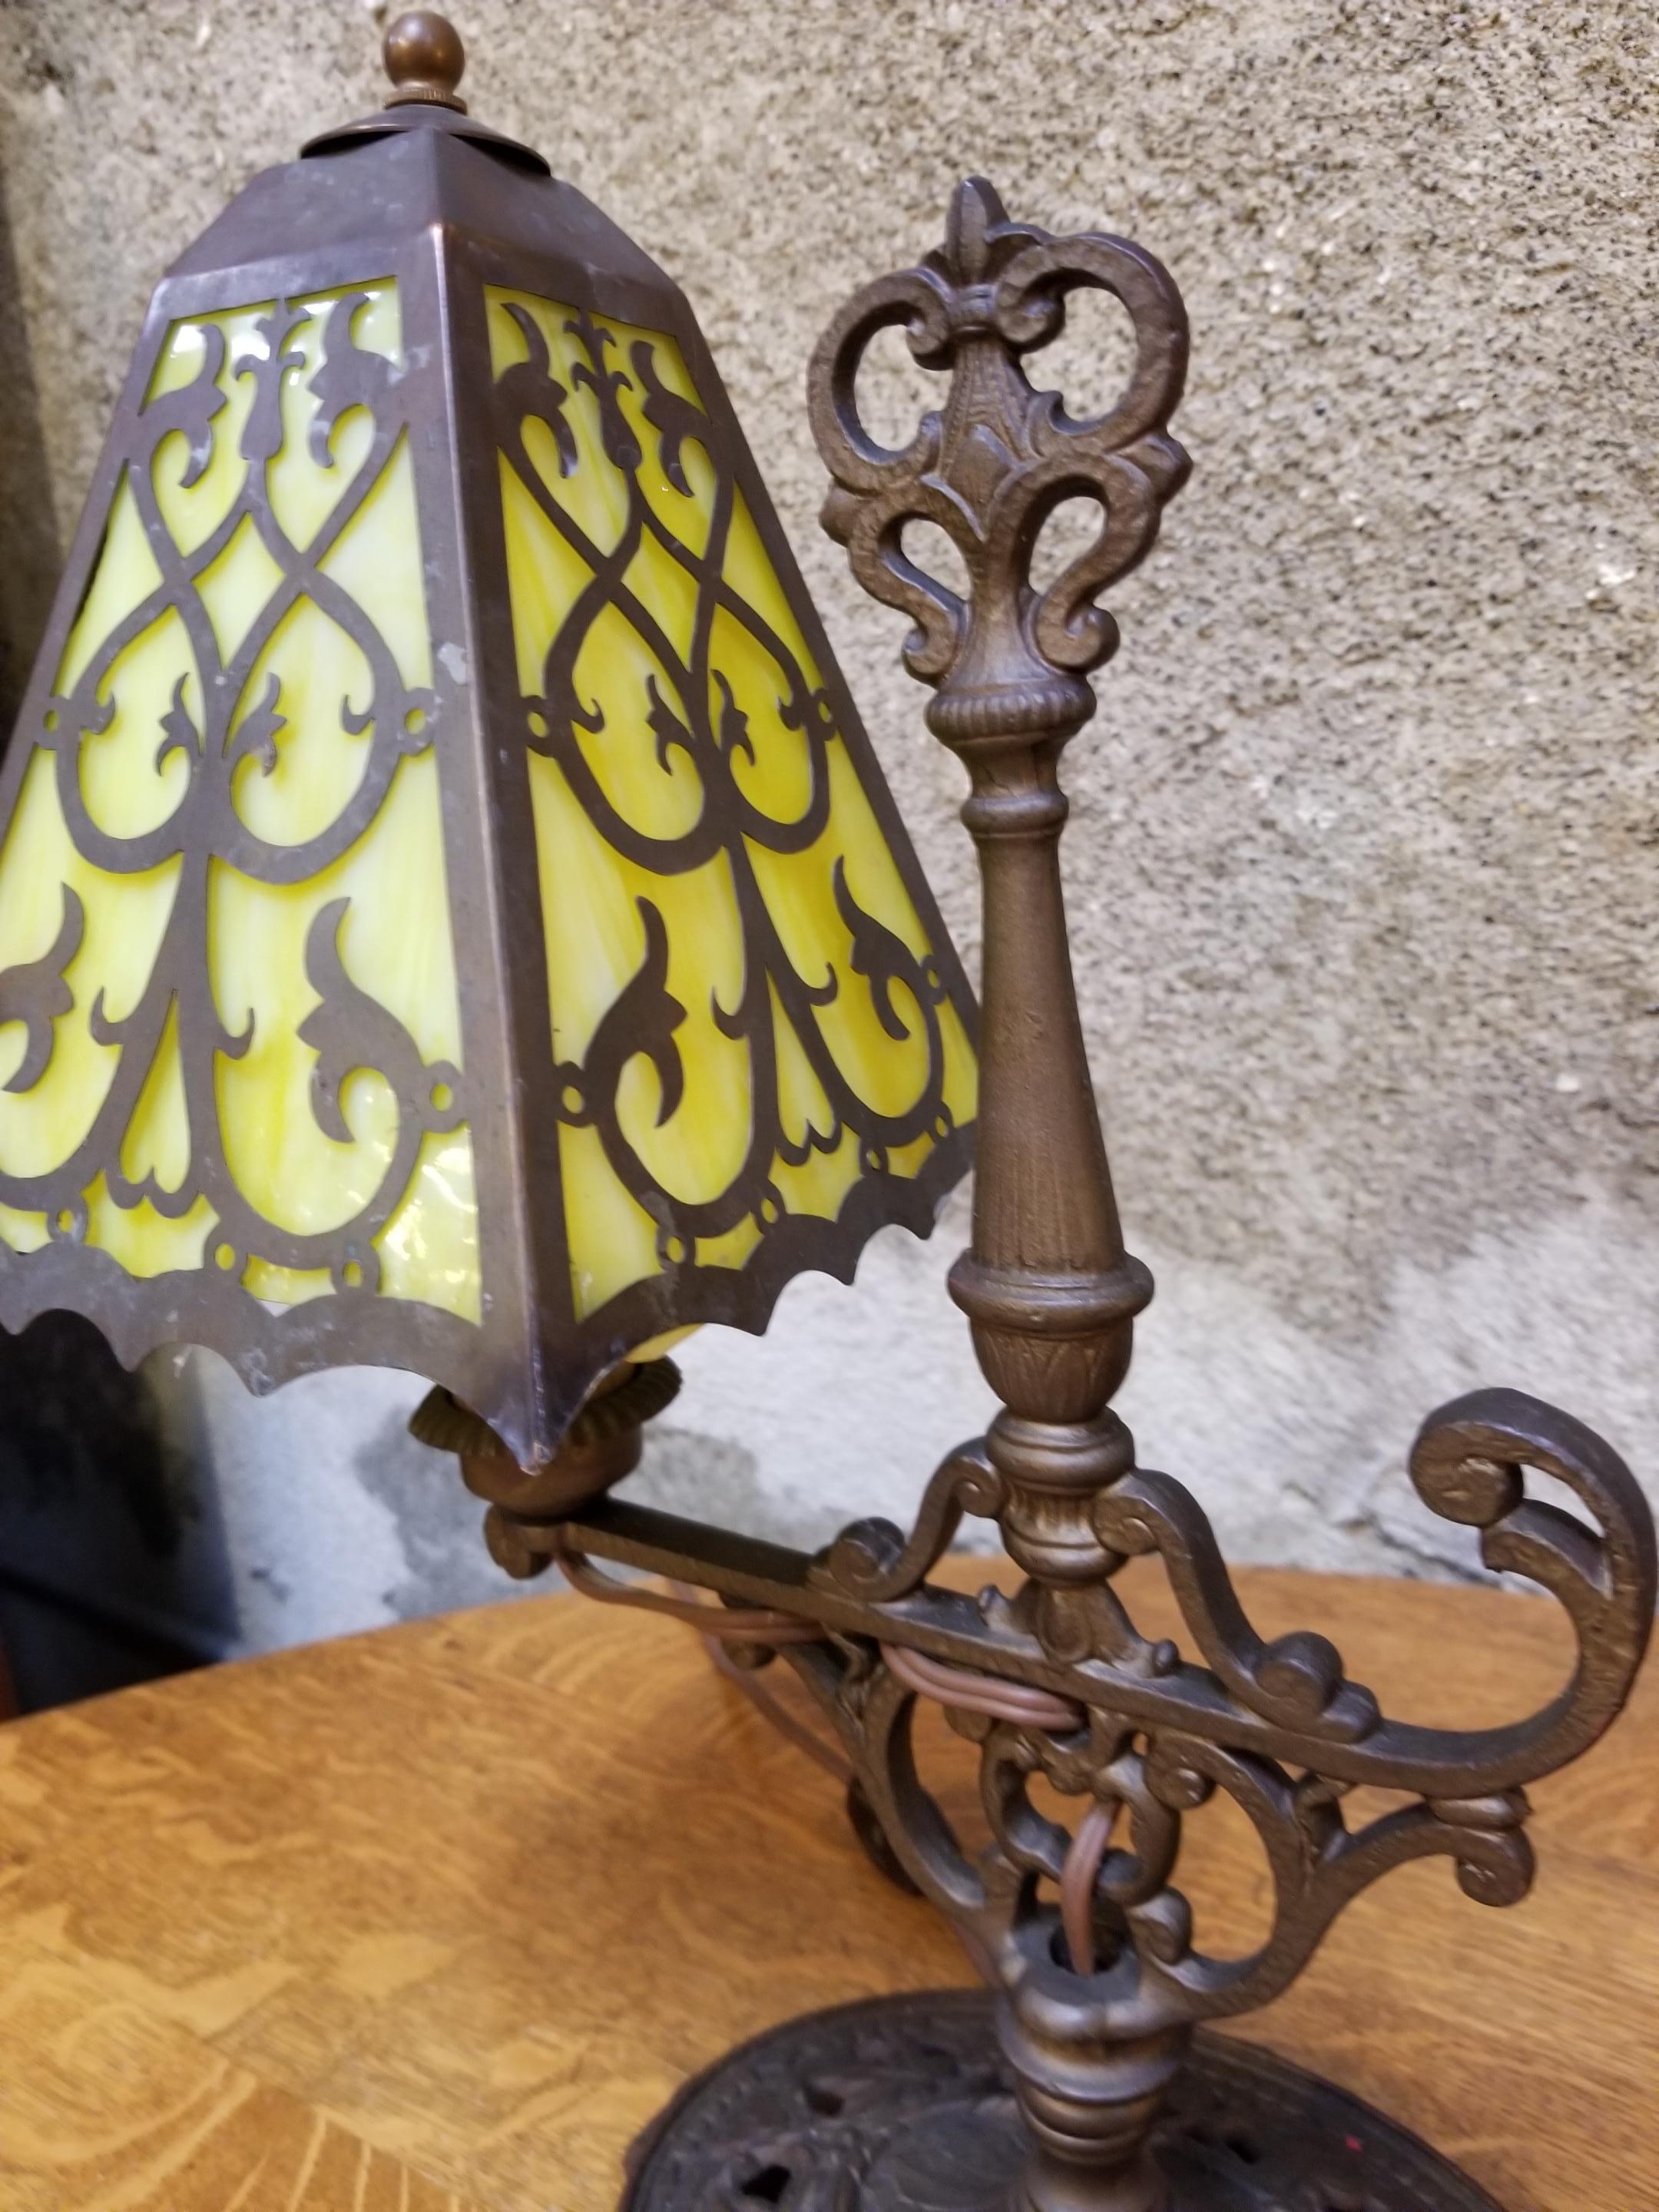 Exquisite pair of 1920s cast iron table lamps with green marbleized opaque glass shades with pierce cut decoration. Designed in the manner of Oscar Bach. Made by J. J. Braze & Company, New York, NY. Original finish and patina. Re-wired. Measure 15.5